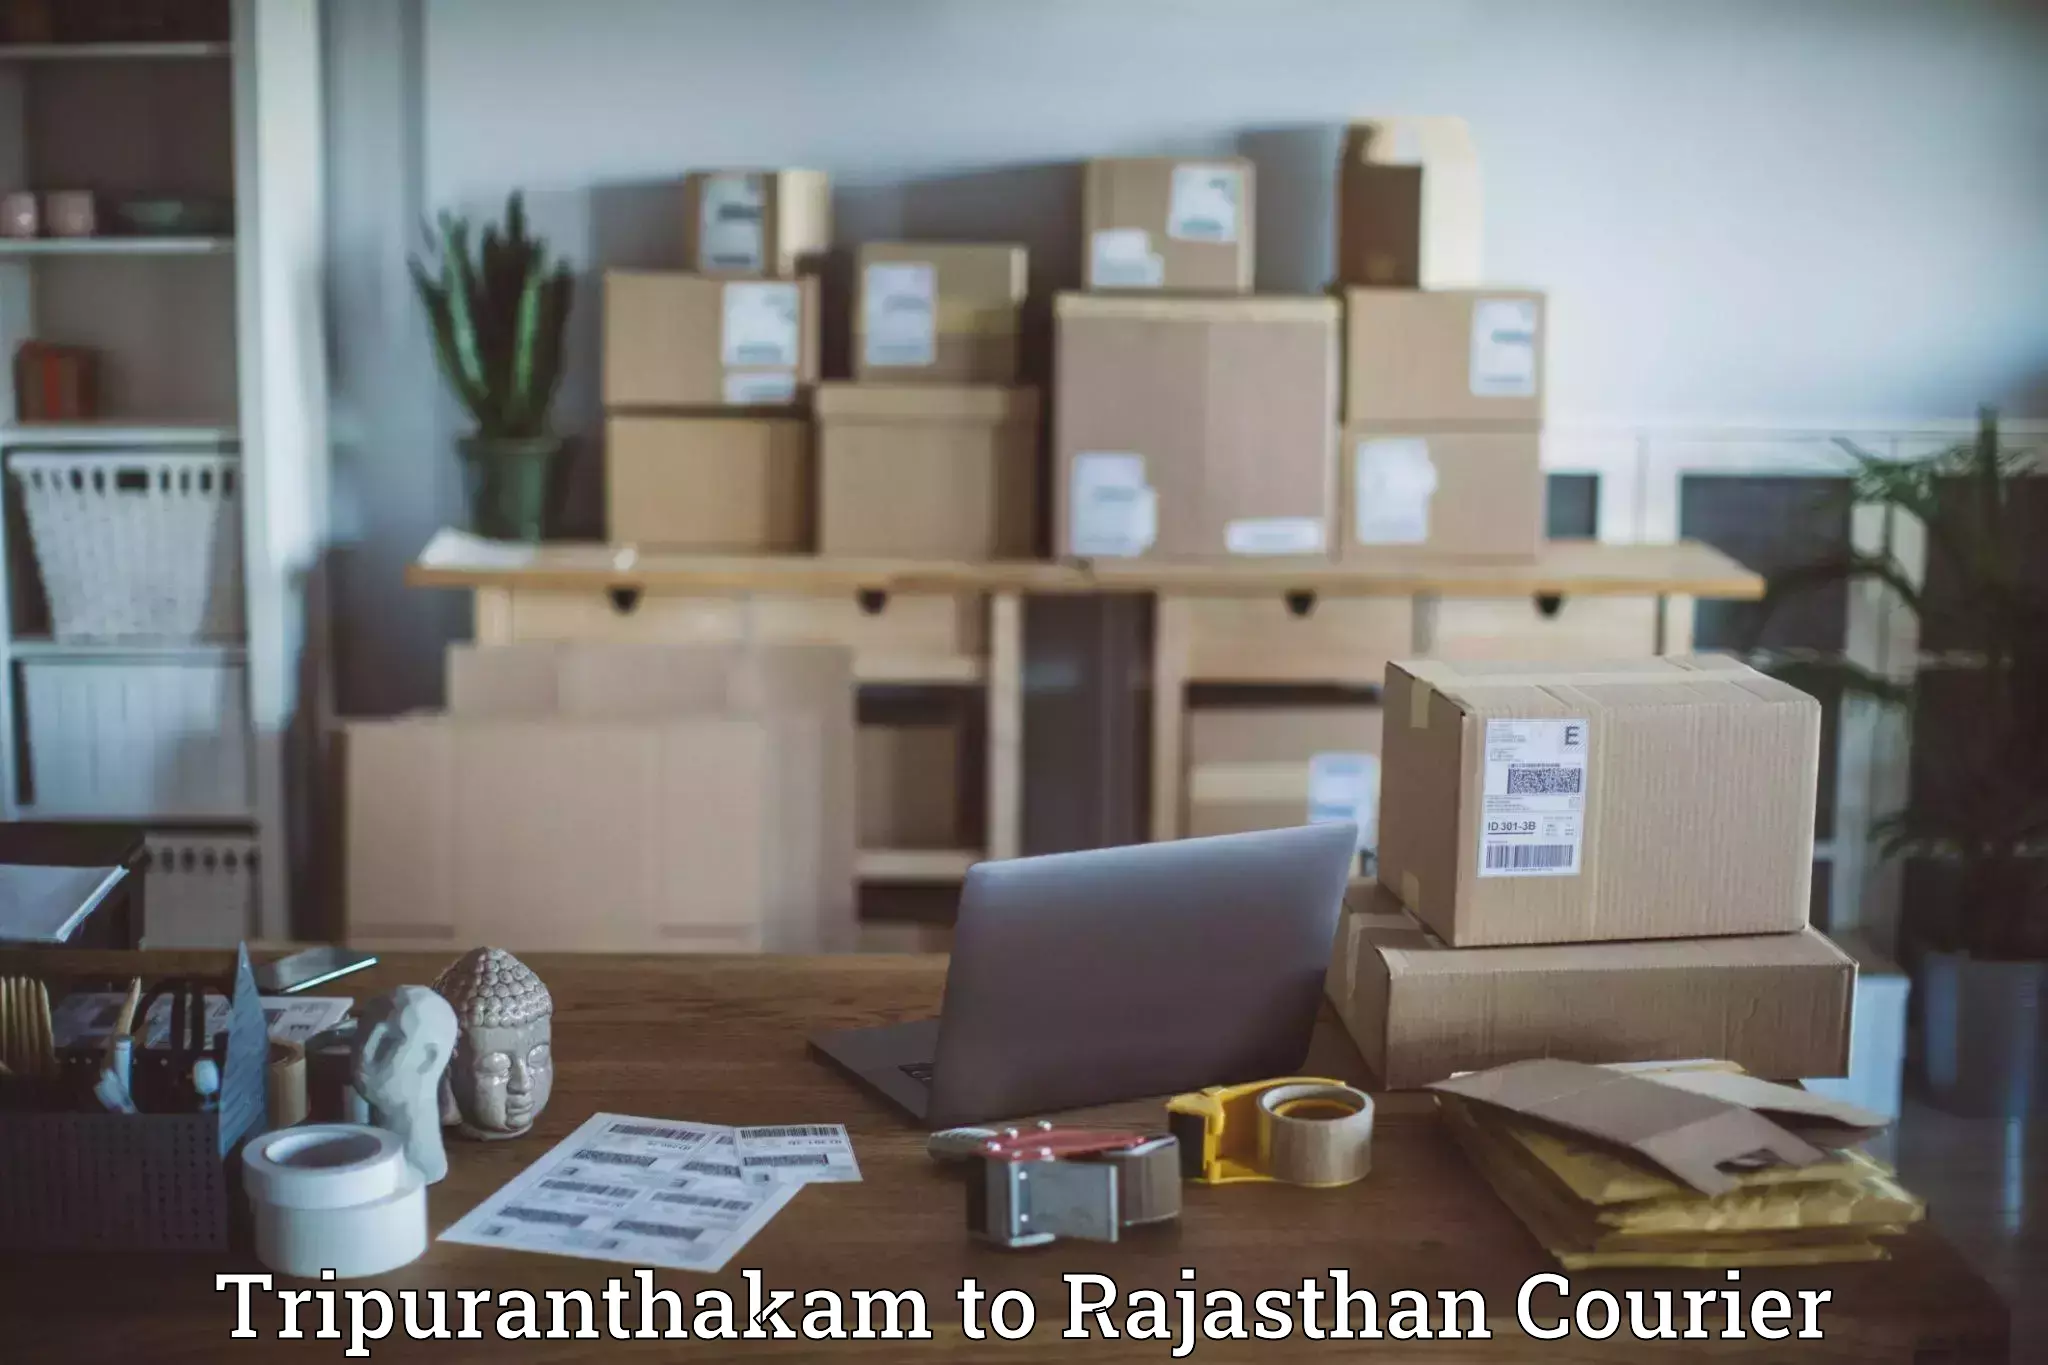 Advanced courier platforms Tripuranthakam to Yeswanthapur